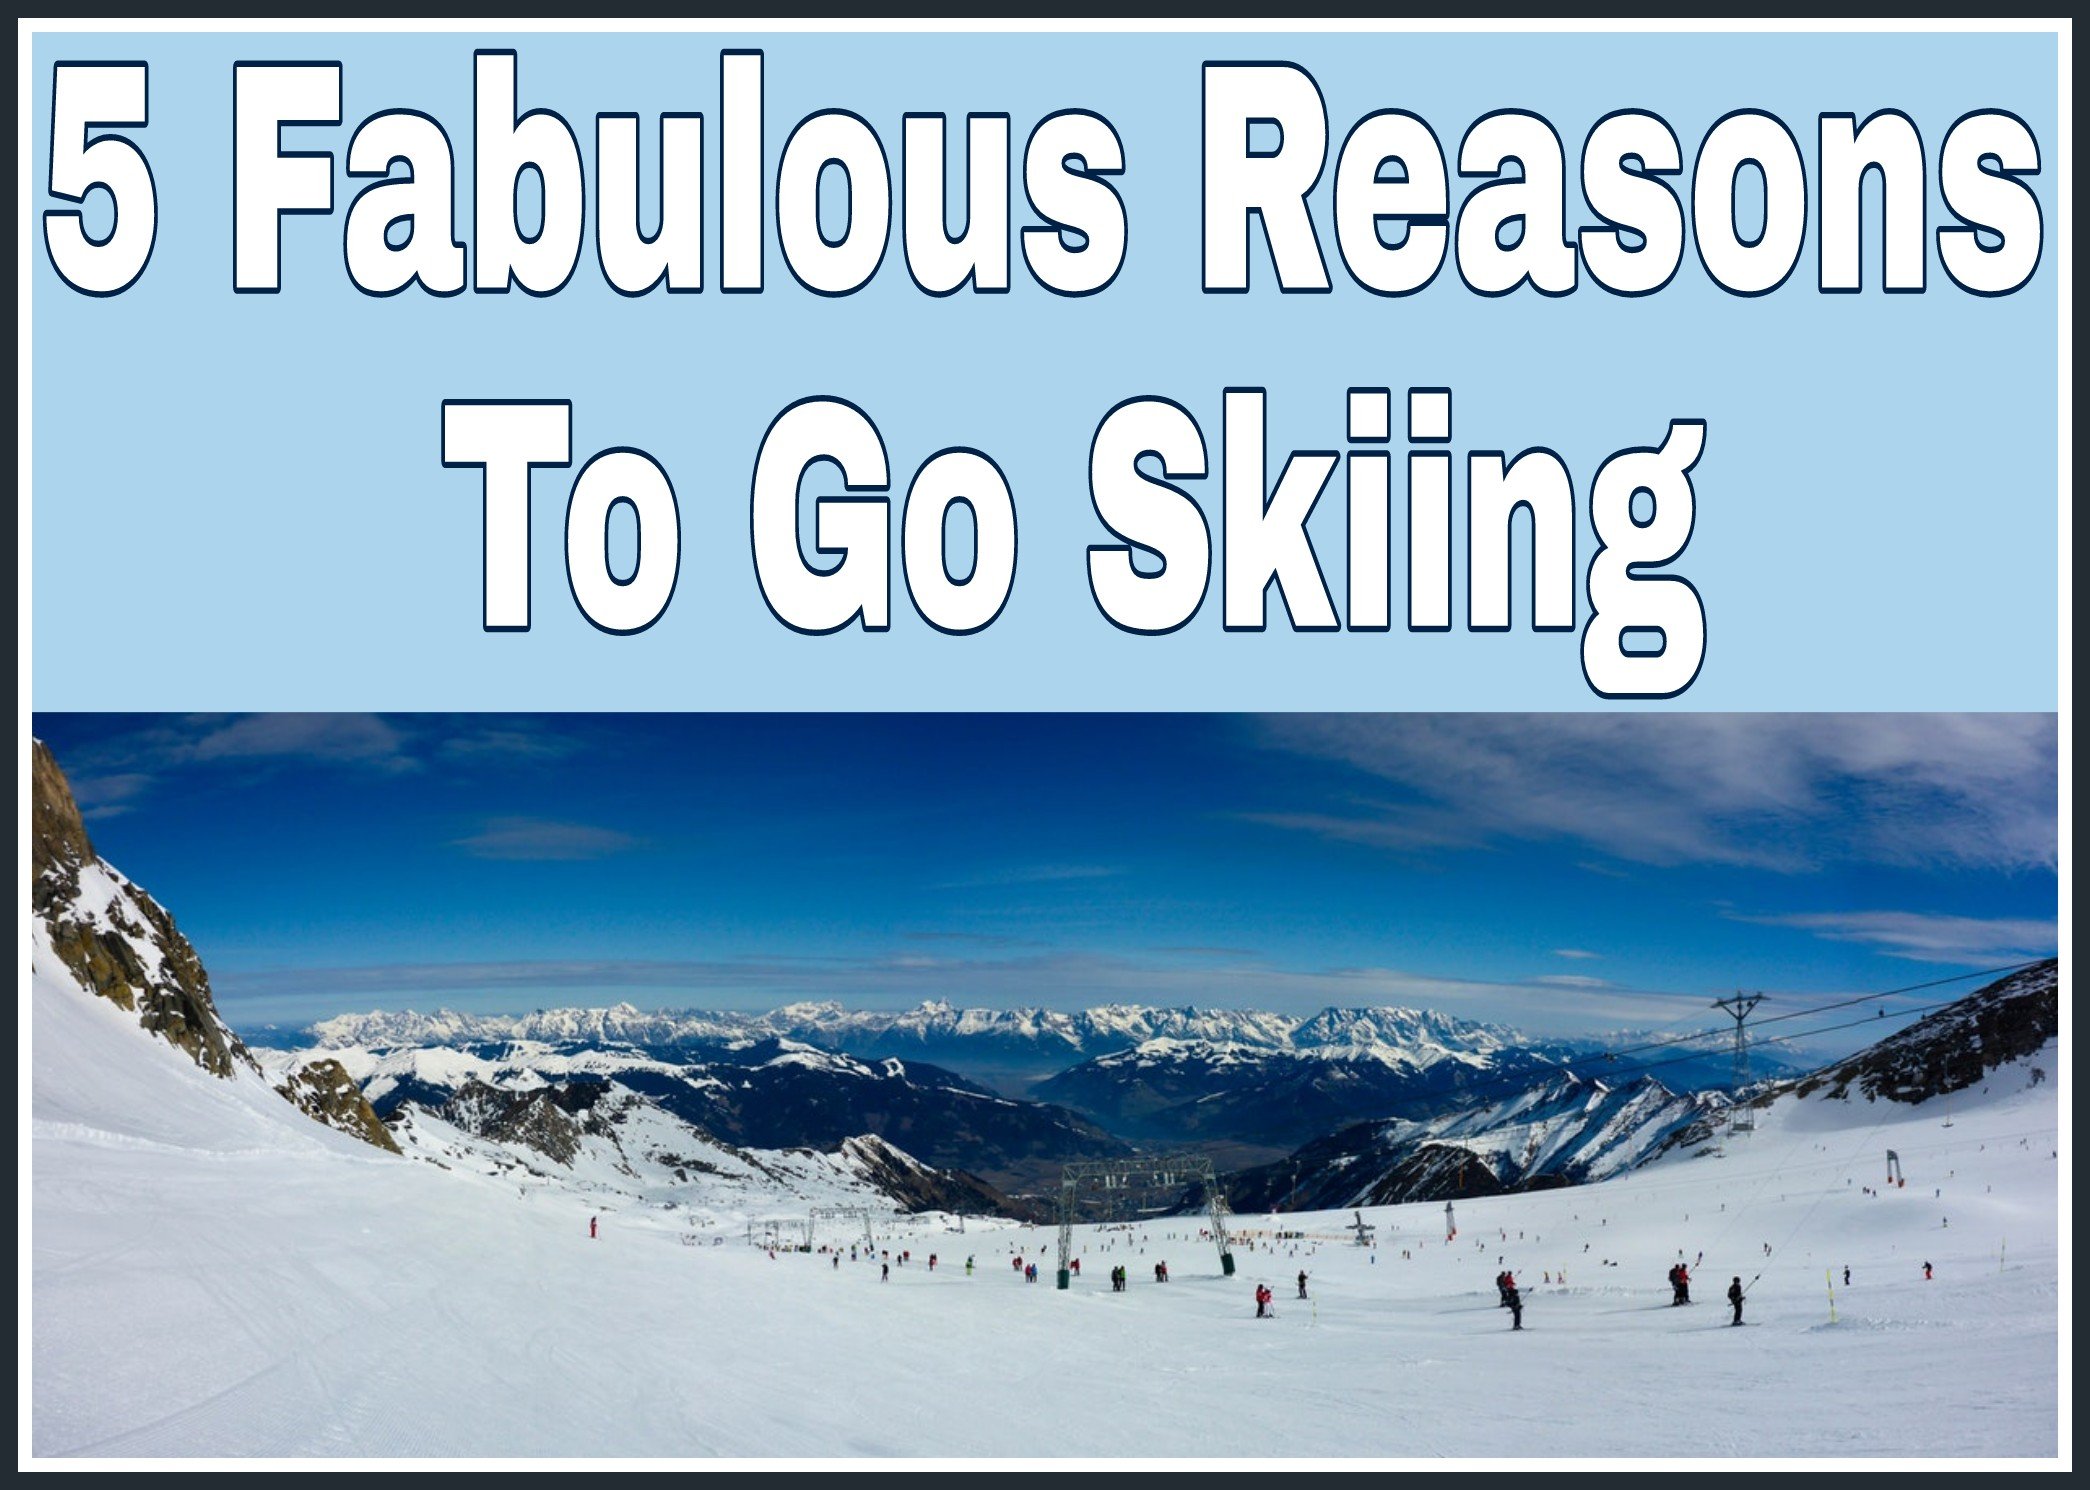 5 fabulous reasons to go skiing title with beautiful scenic picture of skiing underneath.